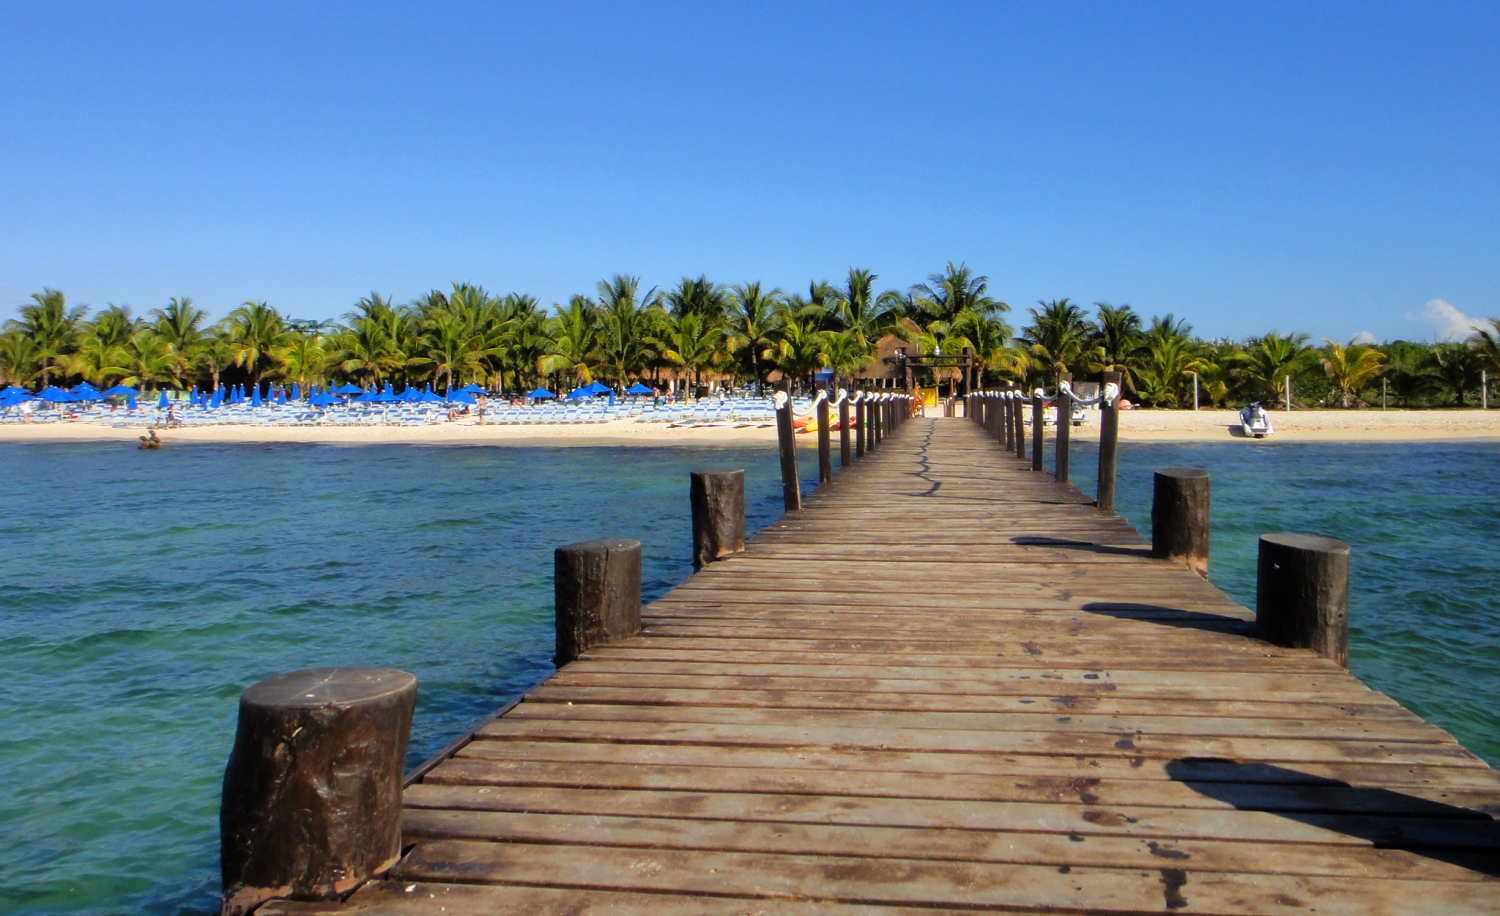 Best experiences to book when in Mexico